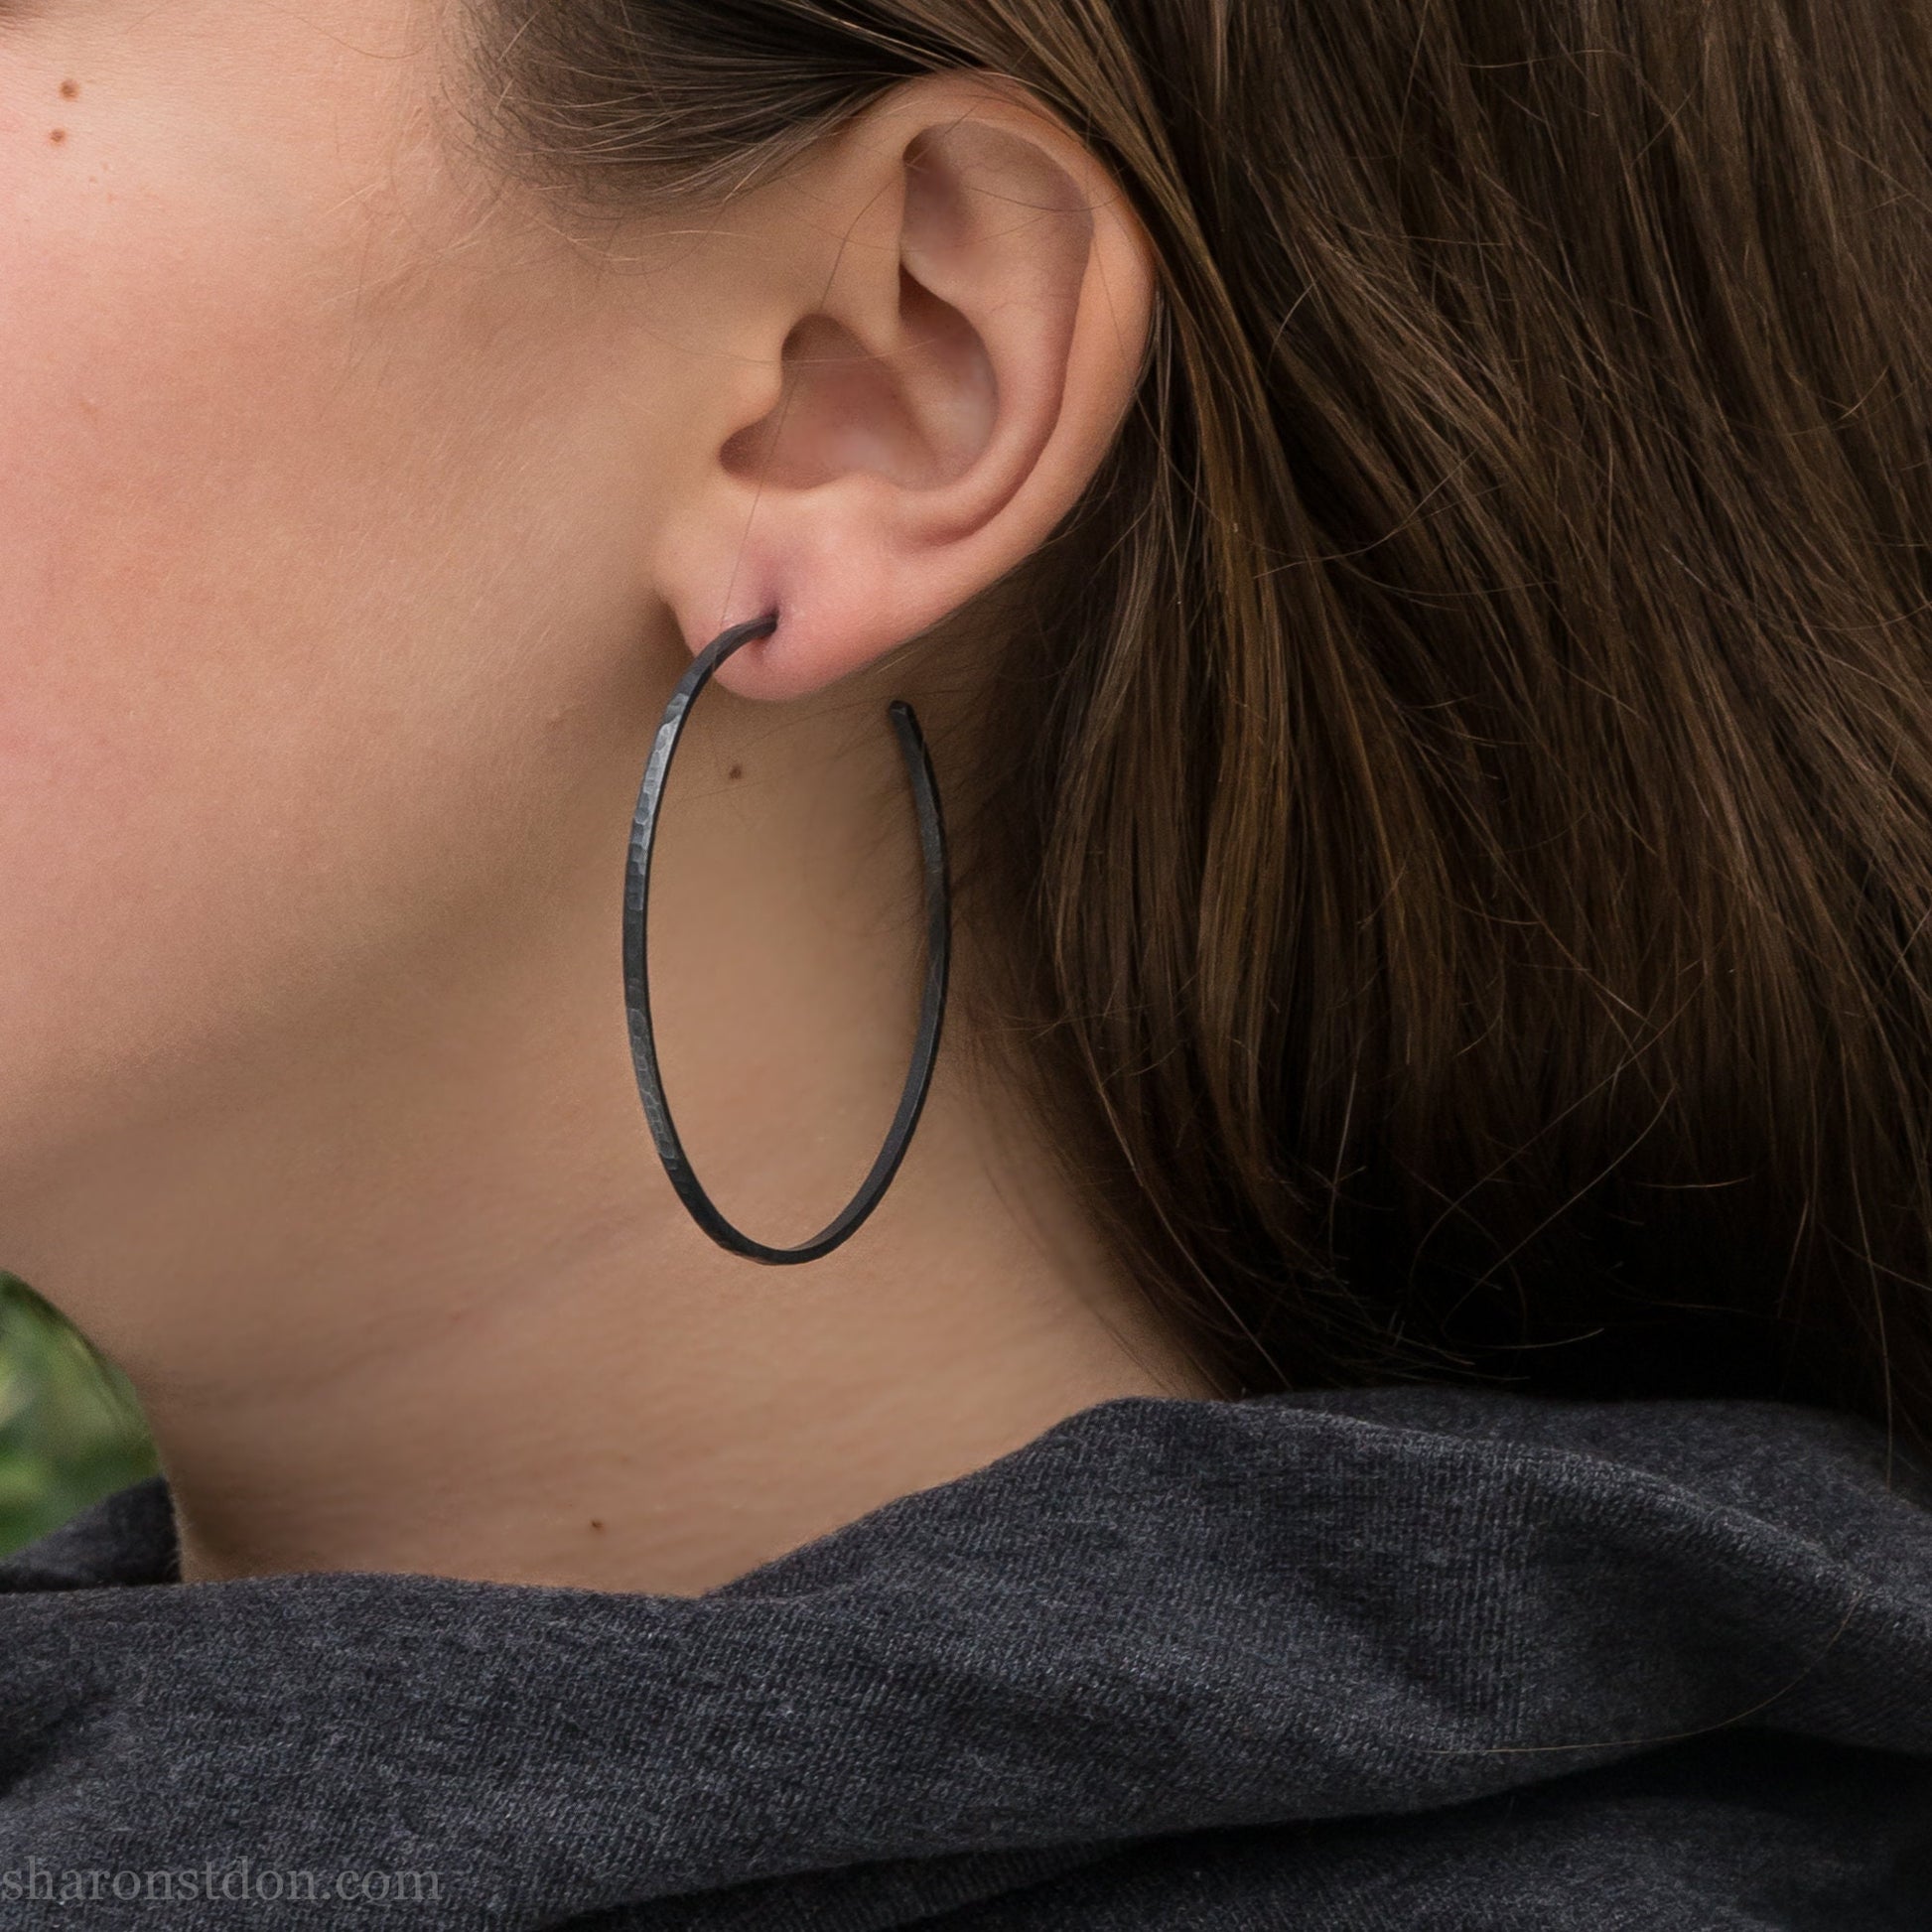 Handmade 925 sterling silver hoop earrings for women. 55mm diameter, 2mm wide, oxidized black, large hoops for daily wear. Minimalist, comfortable, lightweight with a hammered, texture.